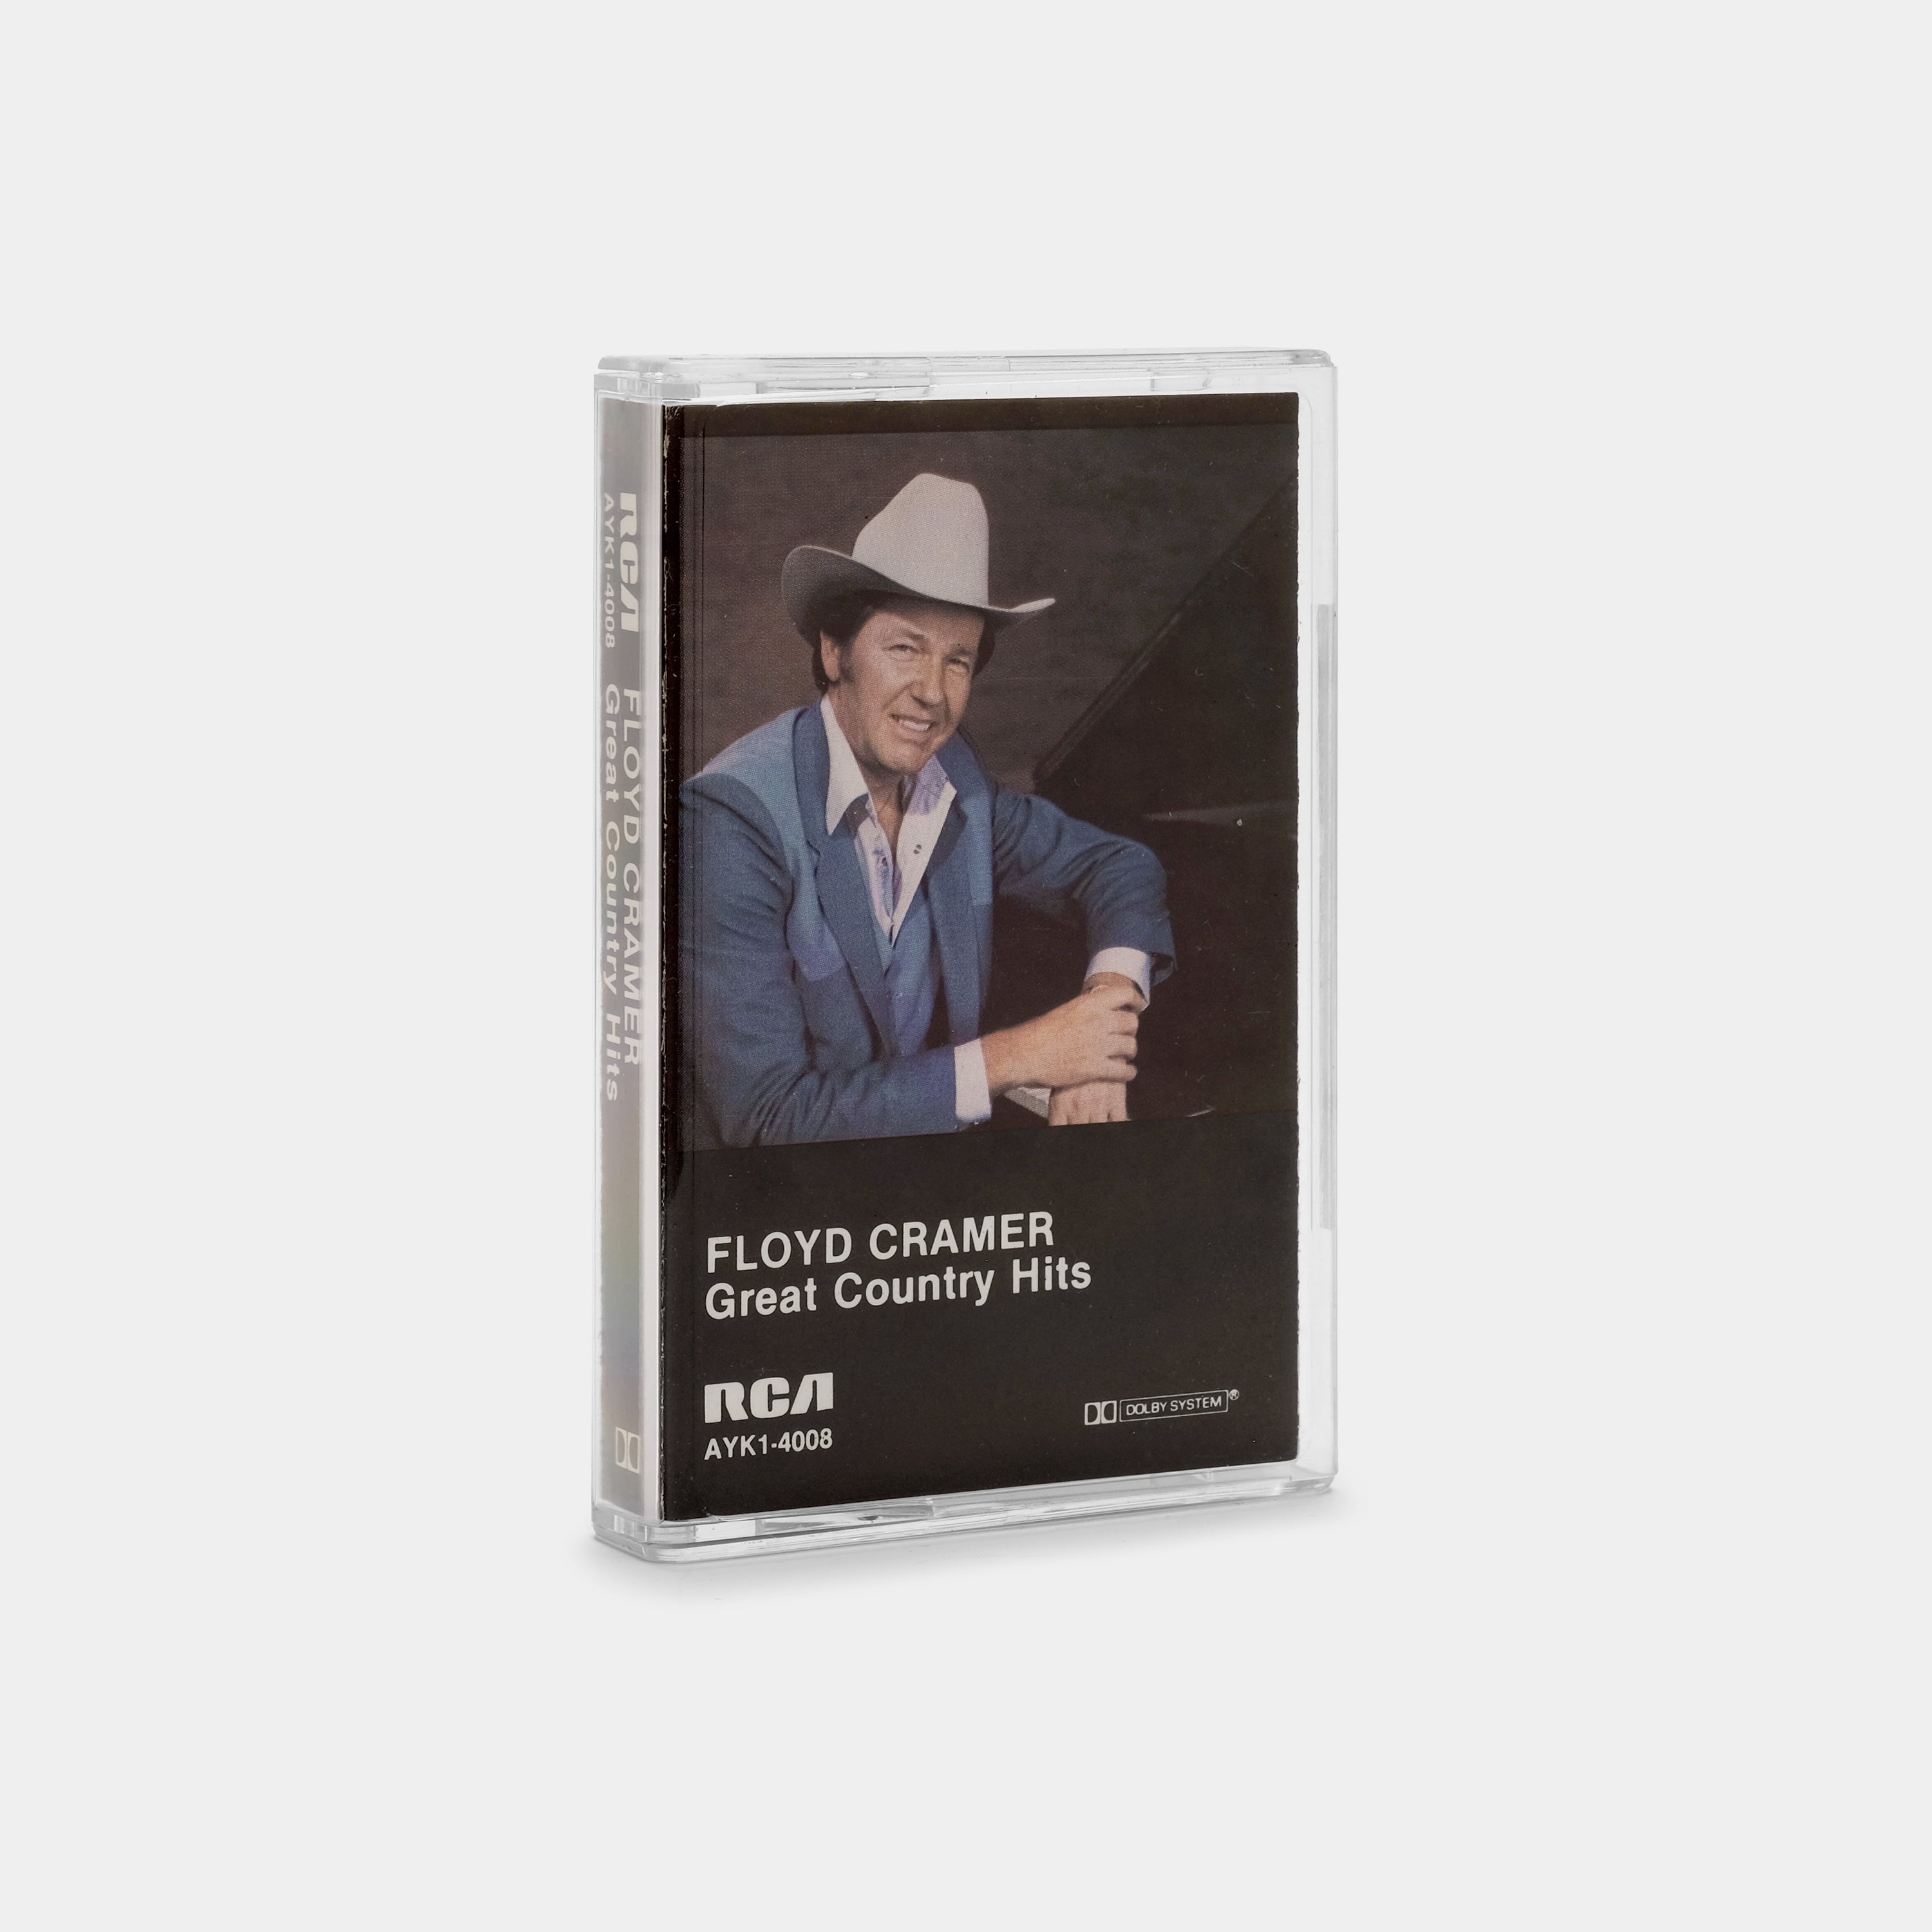 Floyd Cramer - Great Country Hits Cassette Tape